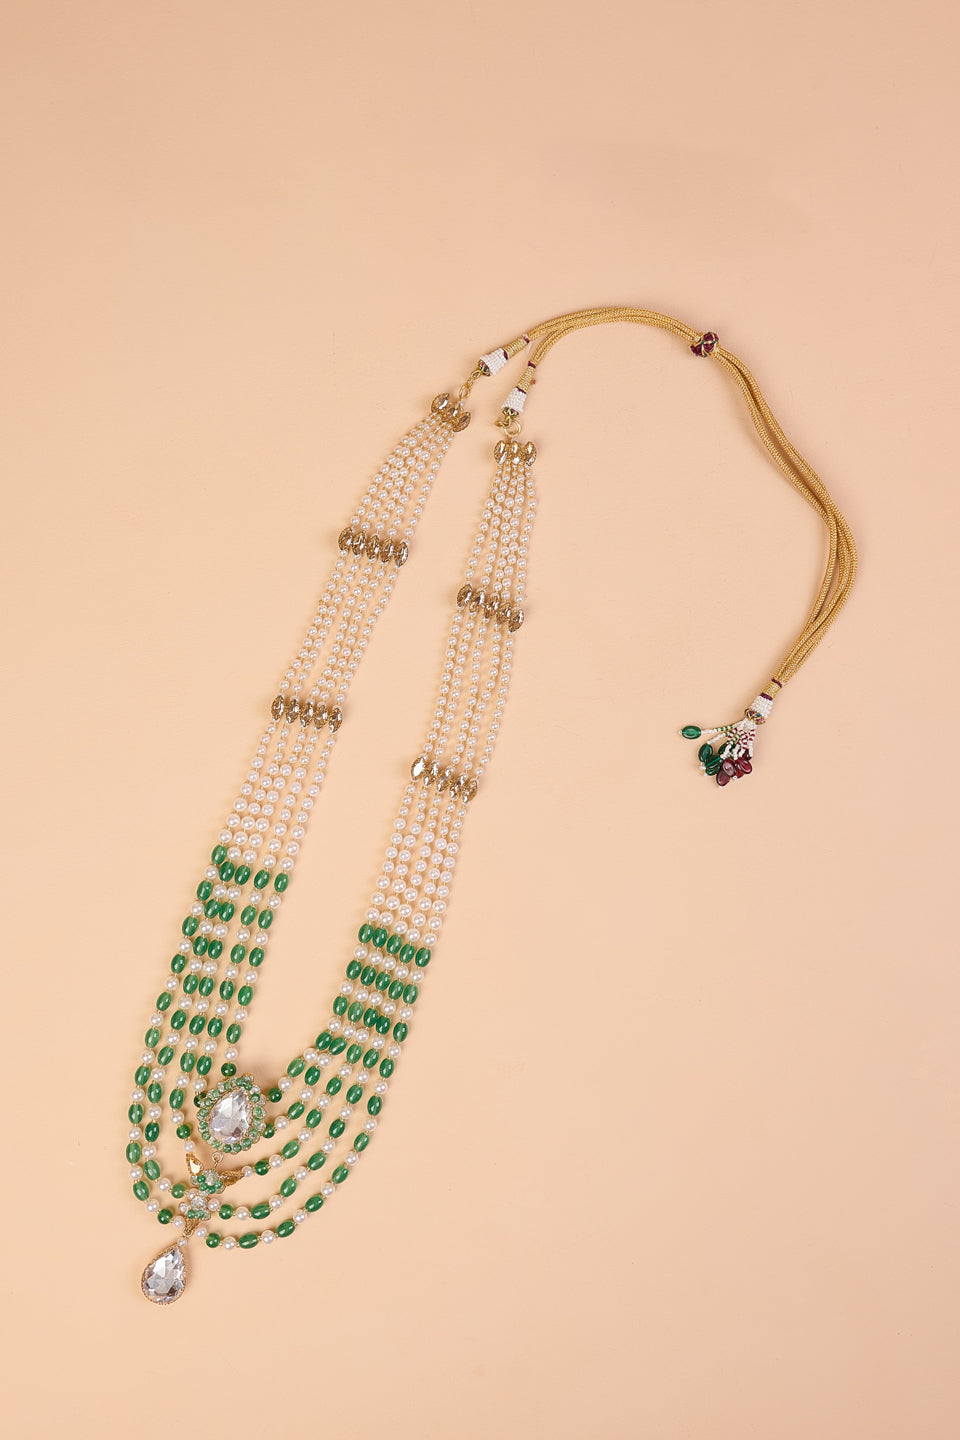 5 Layered Green & Ivpory Beads Mala With Centre Drop Crystal